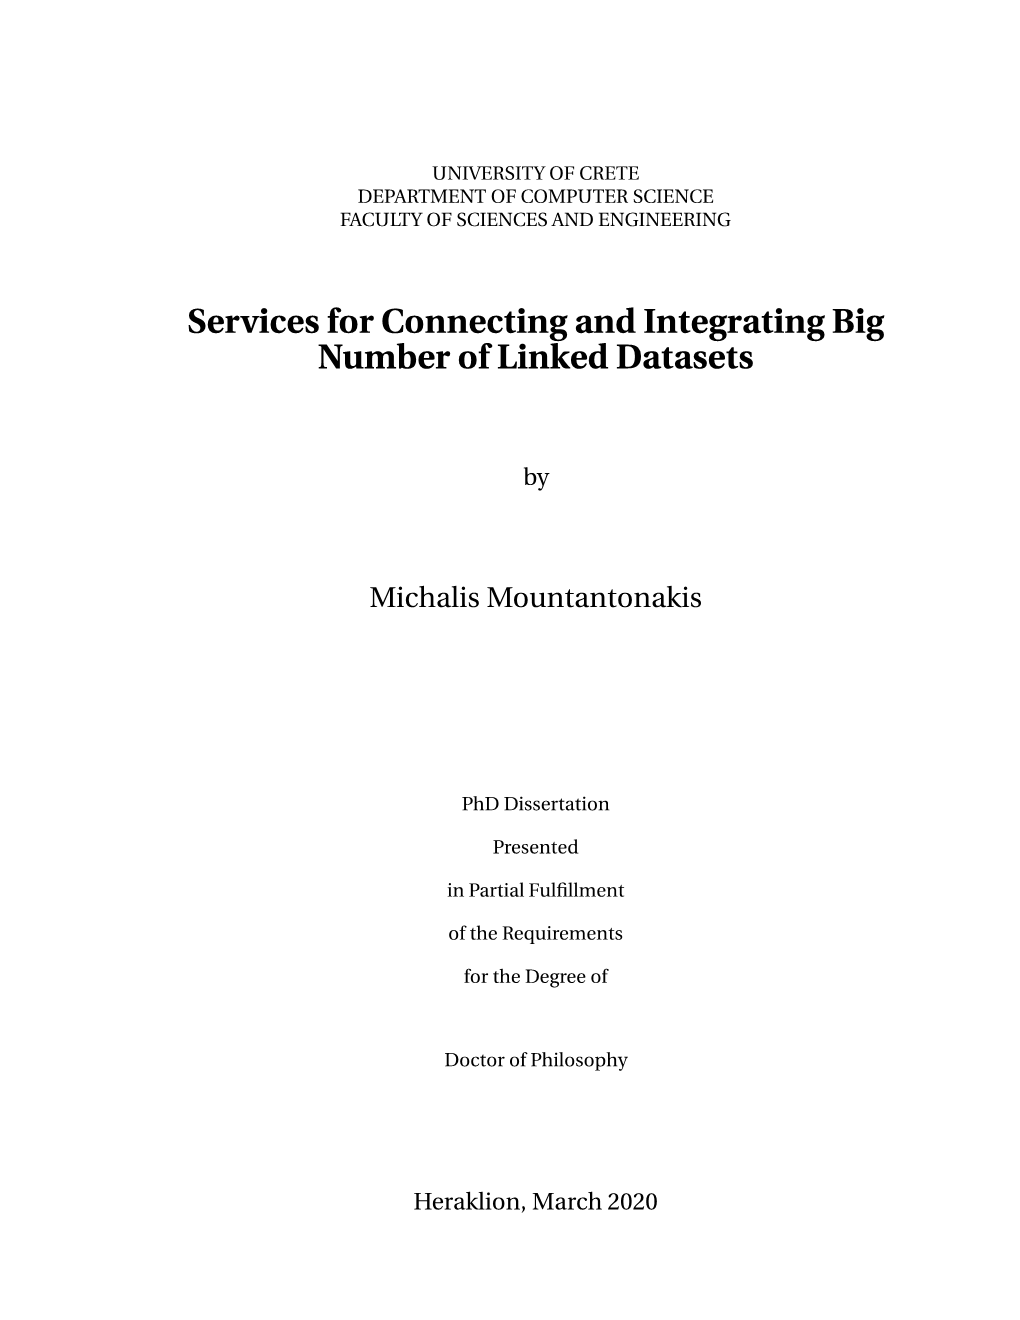 Services for Connecting and Integrating Big Number of Linked Datasets